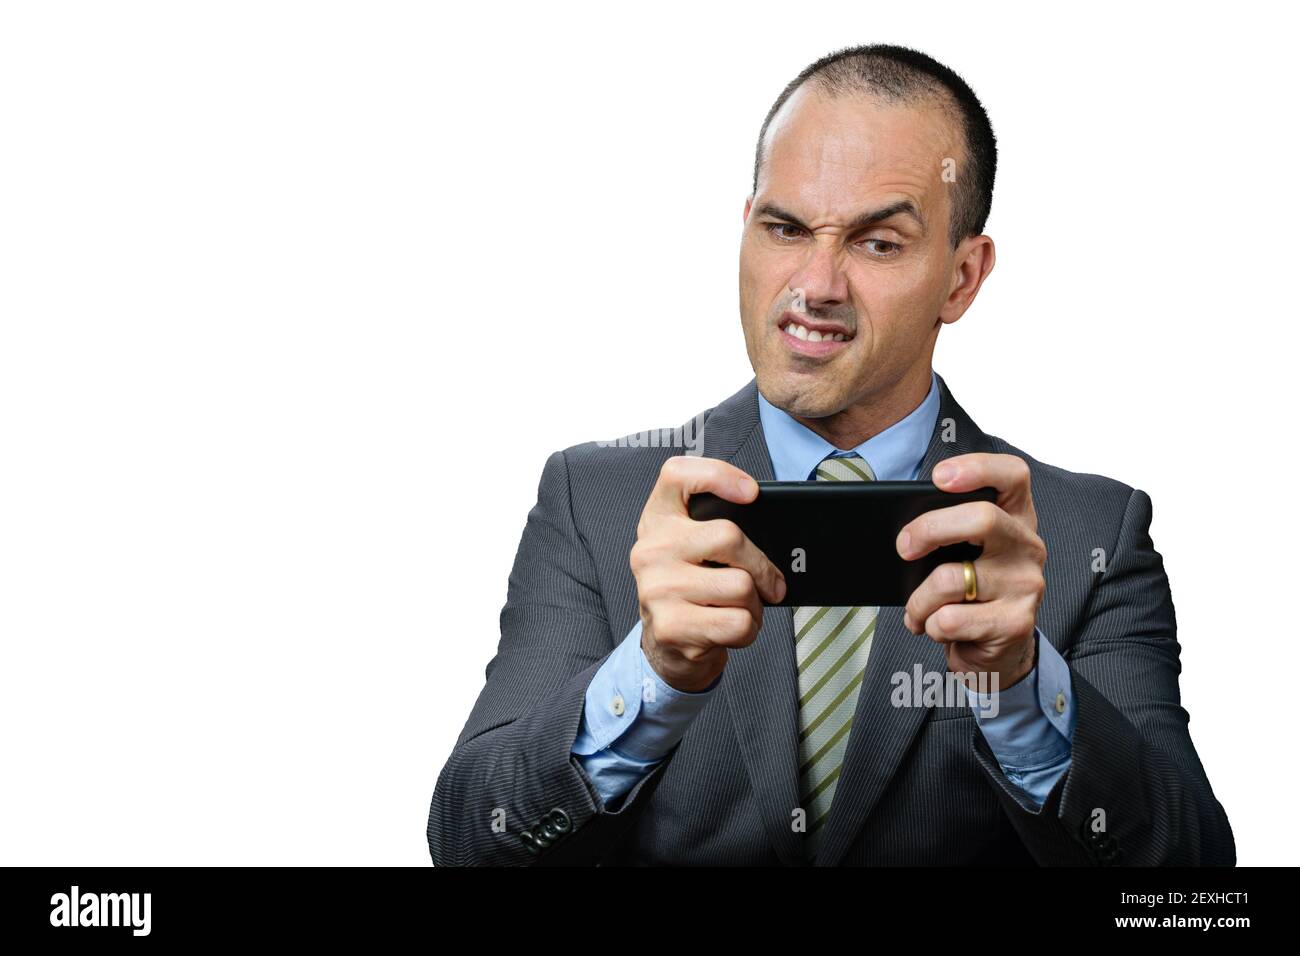 Mature man with suit and tie, playing on his smartphone and making a funny angry face. Stock Photo